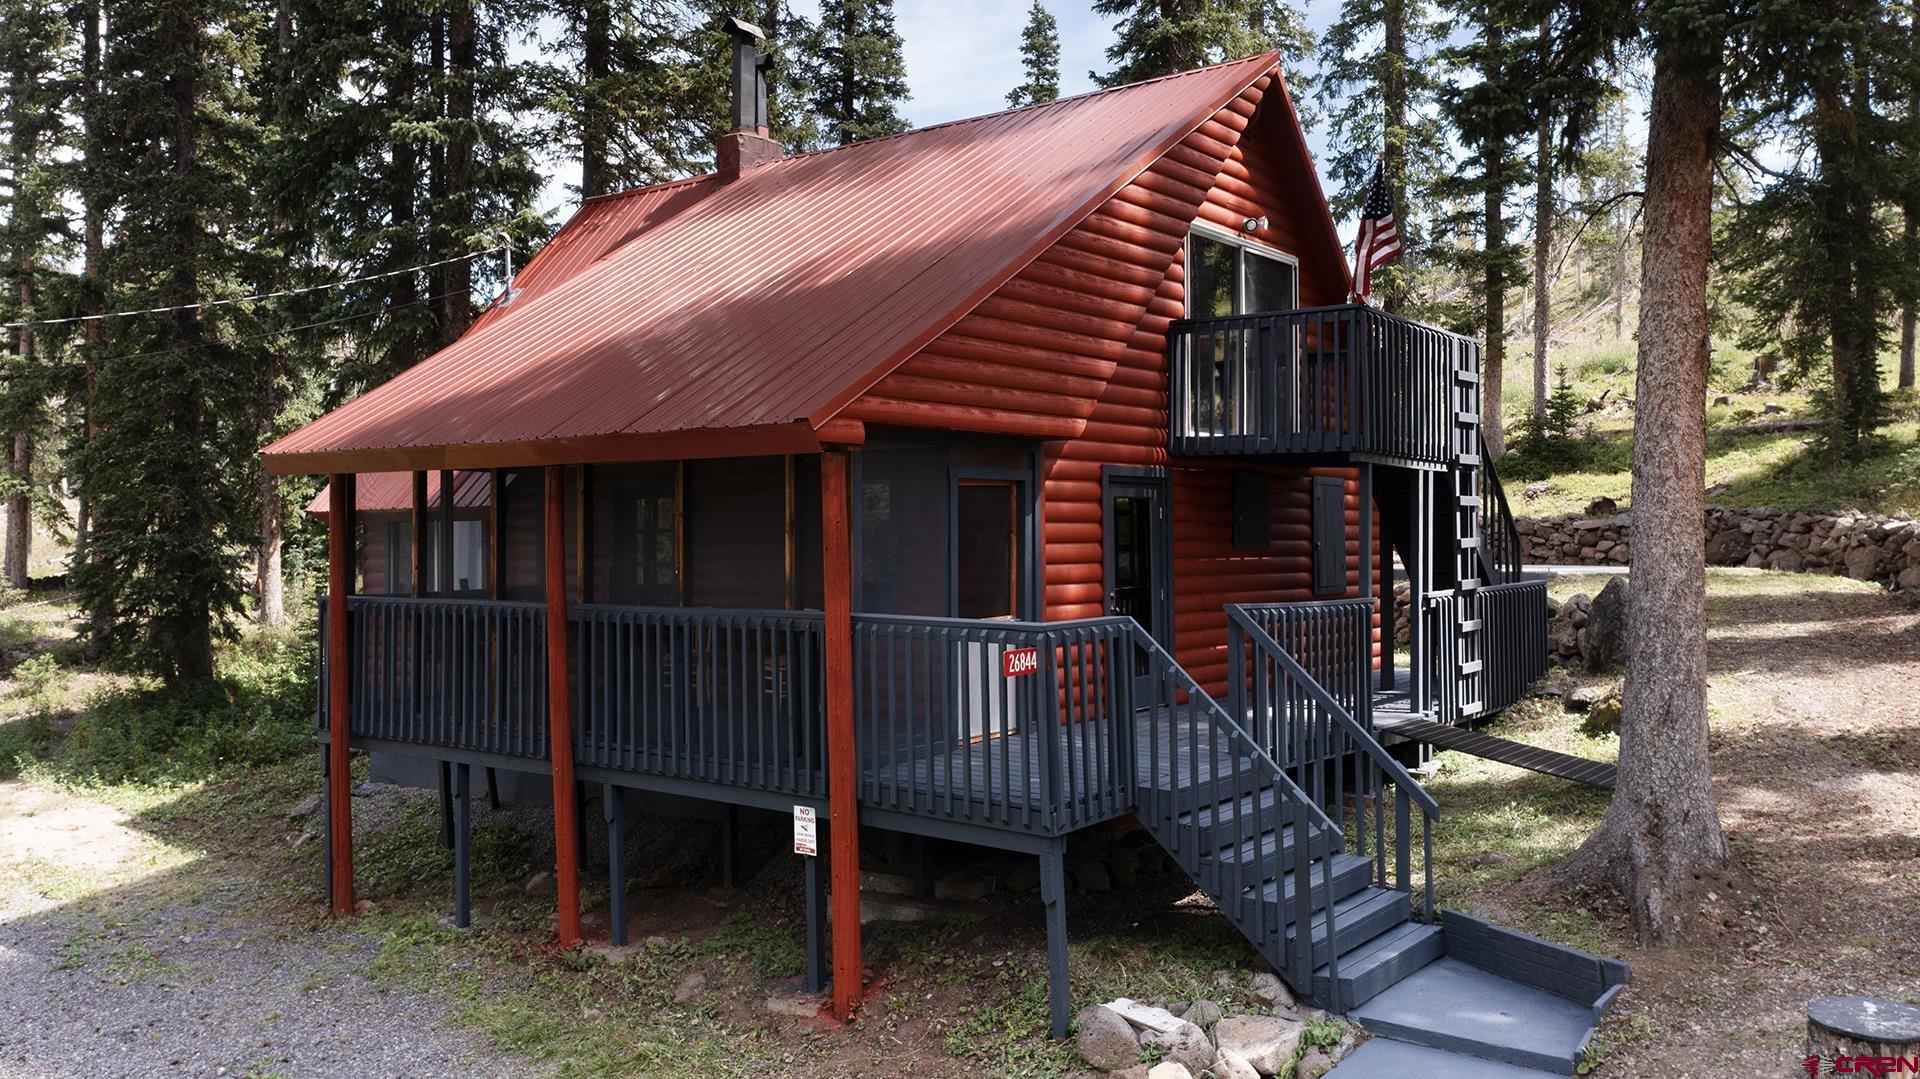 Solid Cabin with several amenities located on the Grand Mesa. Great location backing up to National Forest on a quiet circle drive away from the main roads. There are two different water sources consisting of domestic resort water and a well which is what the Sellers currently use. This property has a permitted septic system eliminating the task of seasonal pump outs from the typical vault system. Two propane tanks to last through the winter. In addition to the propane forced air furnace there is a nice wood stove that has no problem heating the entire cabin. Both levels have at least a 3/4 bath each with a shower. Beautiful Hardwood floors really make the interior pop! Modern kitchen set up with good cabinets and appliances! Attached wood storage shed so you do not have to go outside in the winter to retrieve wood. Big deck with a large screened-in porch for bug free enjoyment! The deck and cabin were recently painted. Expanded crawl space makes for good extra storage. There is a 14x24 slab with J bolts ready to build a garage on! This place is set up for year round use! This cabin is part of the Grand Mesa Resort Company with dues of $520/year. Buyer will receive a share of stock in the Grand Mesa Resort Company. No real estate being conveyed. No winter road maintenance. Cabin being sold "as is" and furnished.